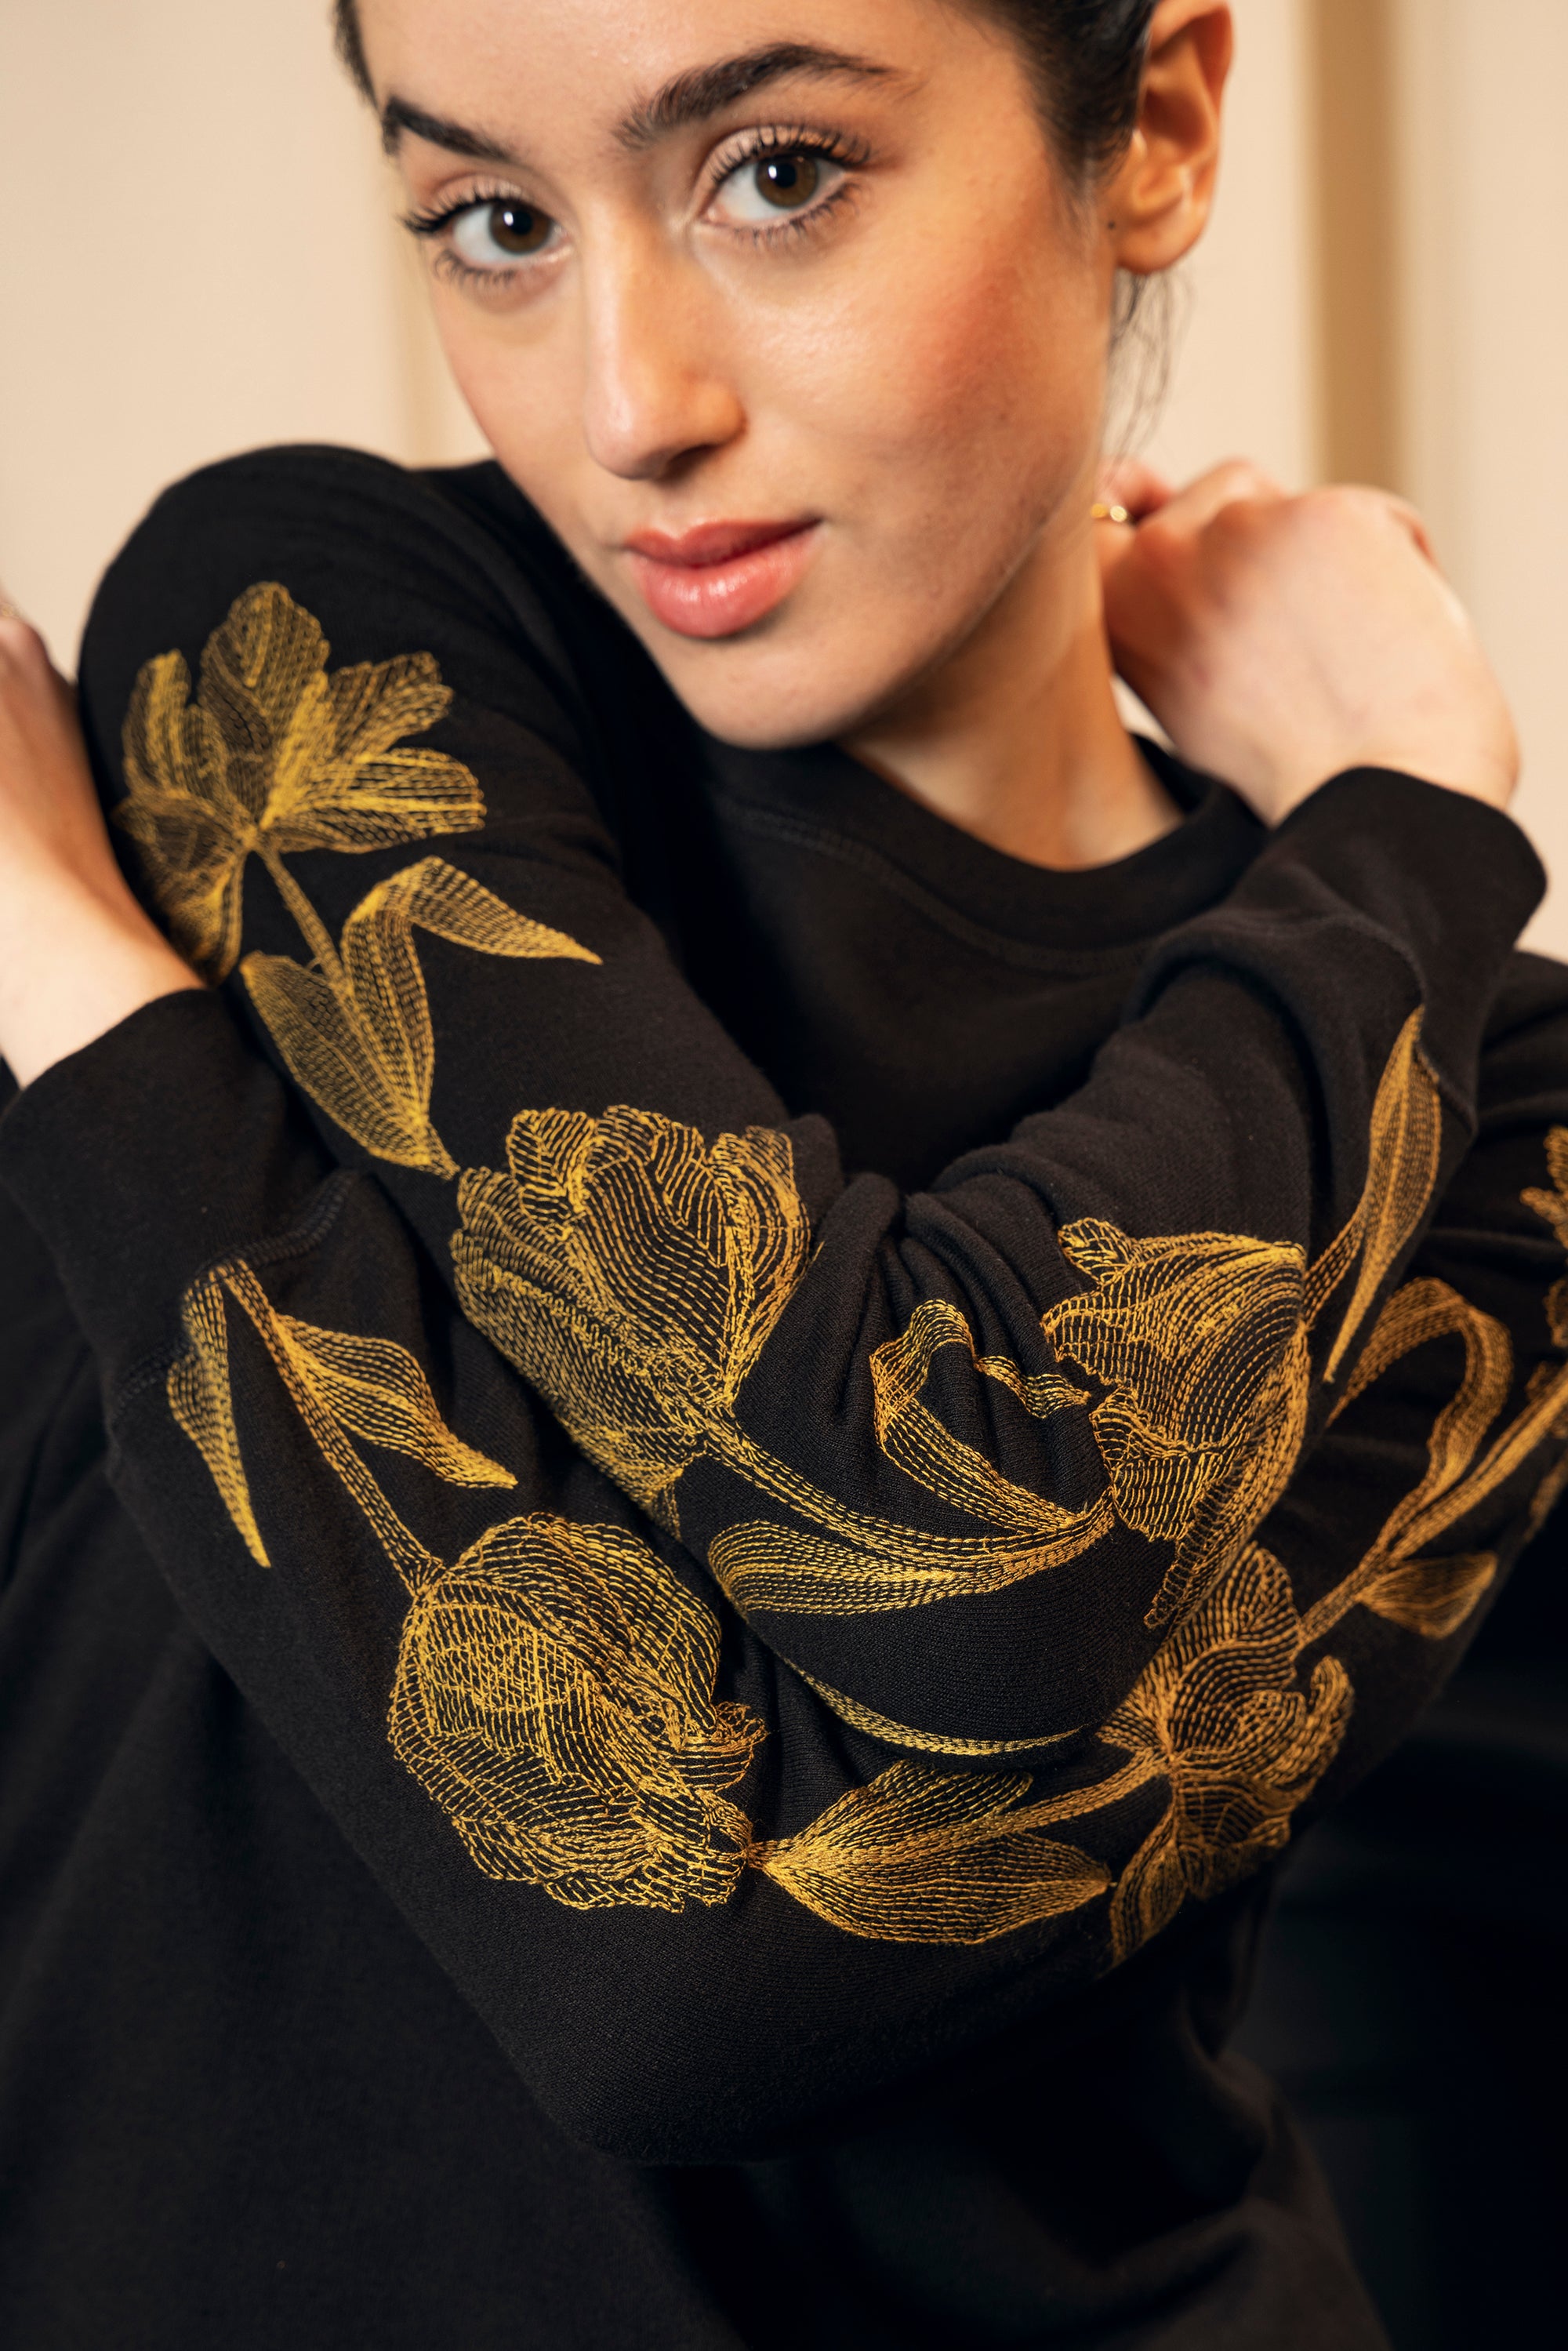 Black sweater embroidery golden flowers tulips magnolia stylish chic ethical fashion responsible Peru